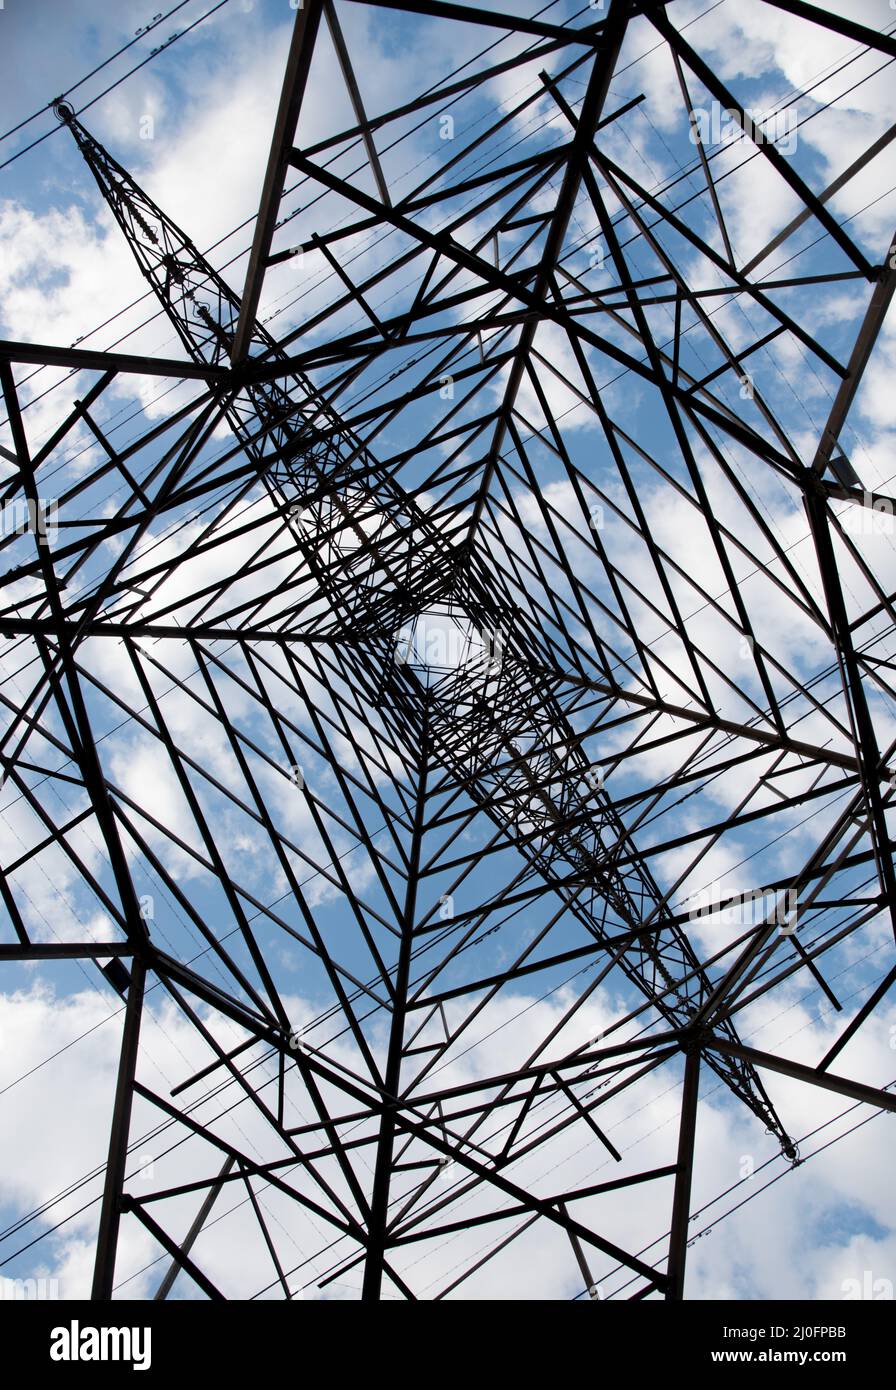 Electricity pylon tower details, energy supply Stock Photo